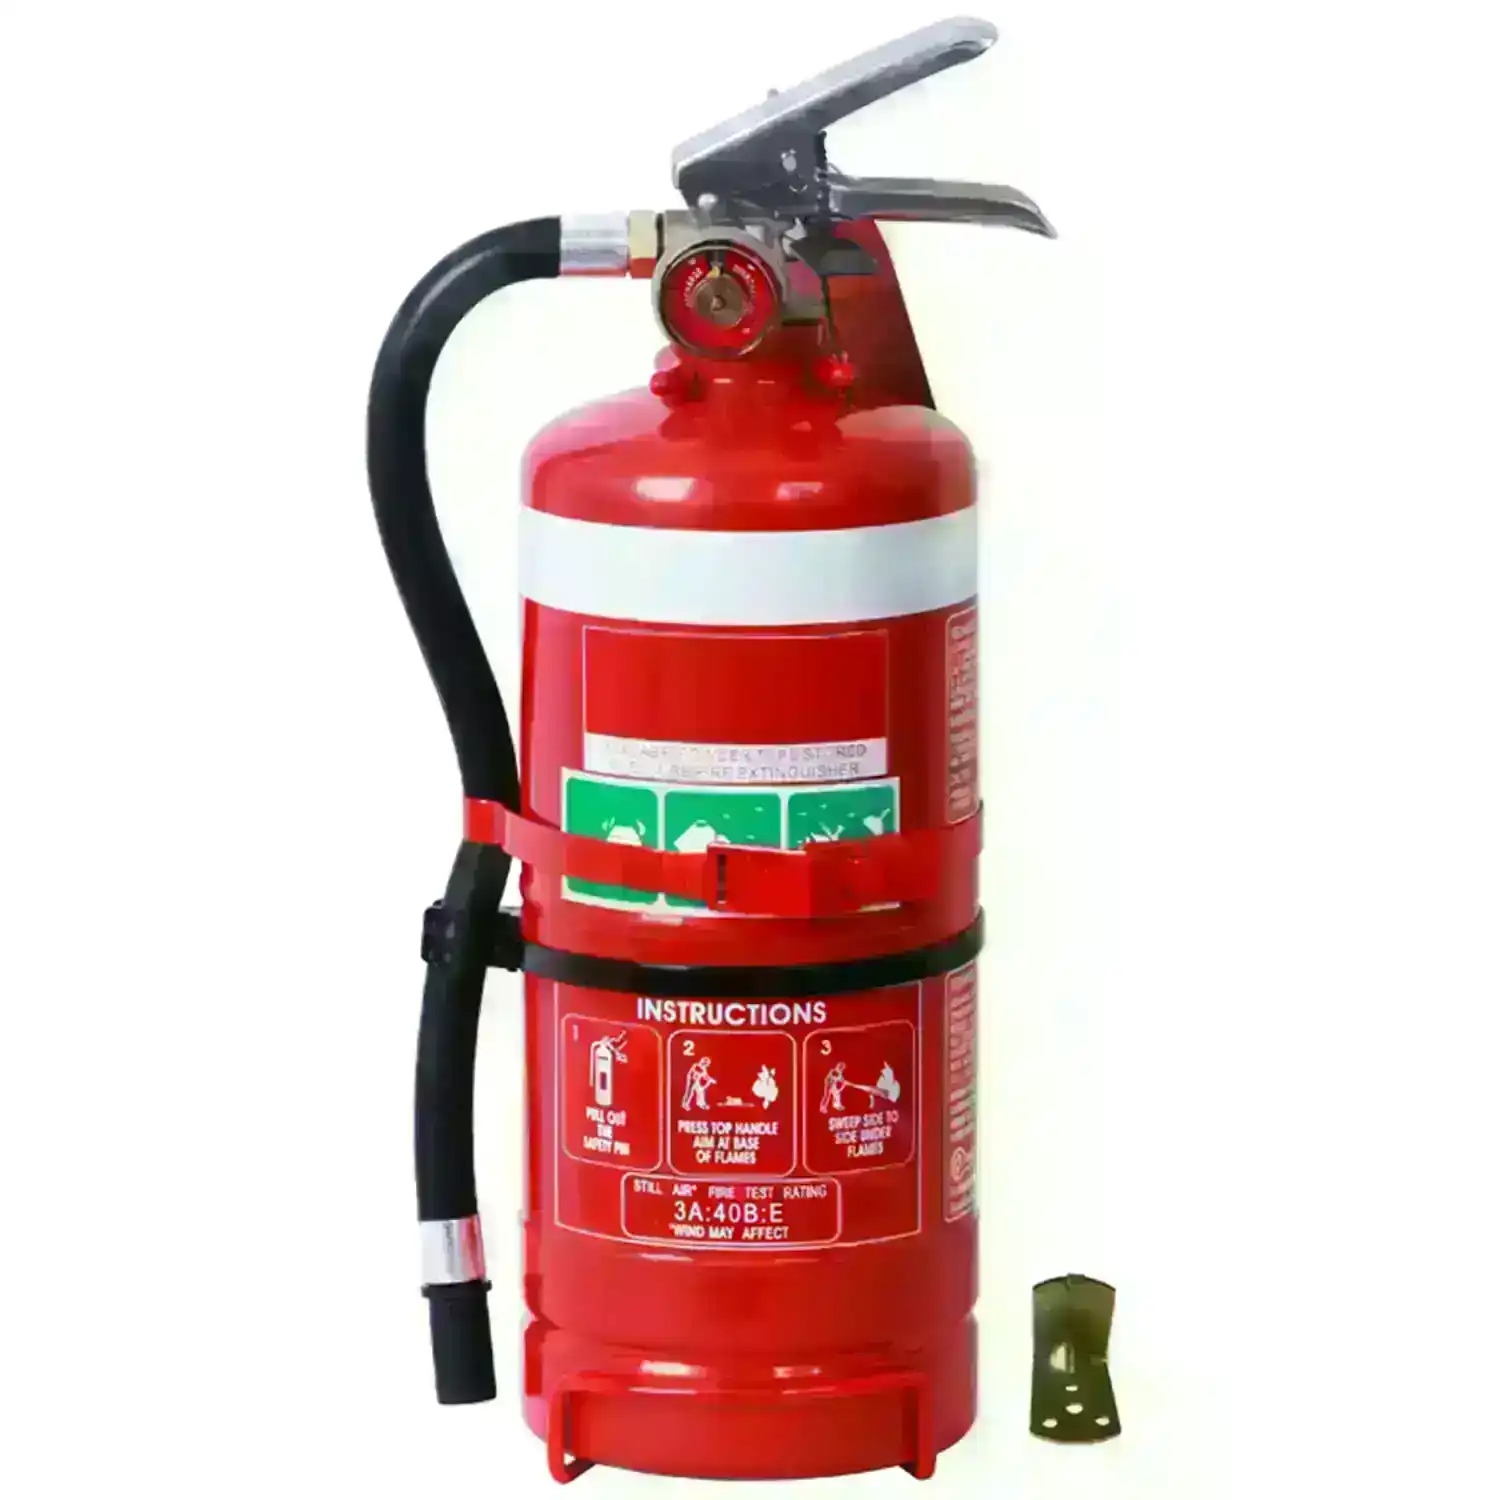 2.5KG High Pressure Dry Powder Fire Extinguisher with Vehicle and Wall Bracket